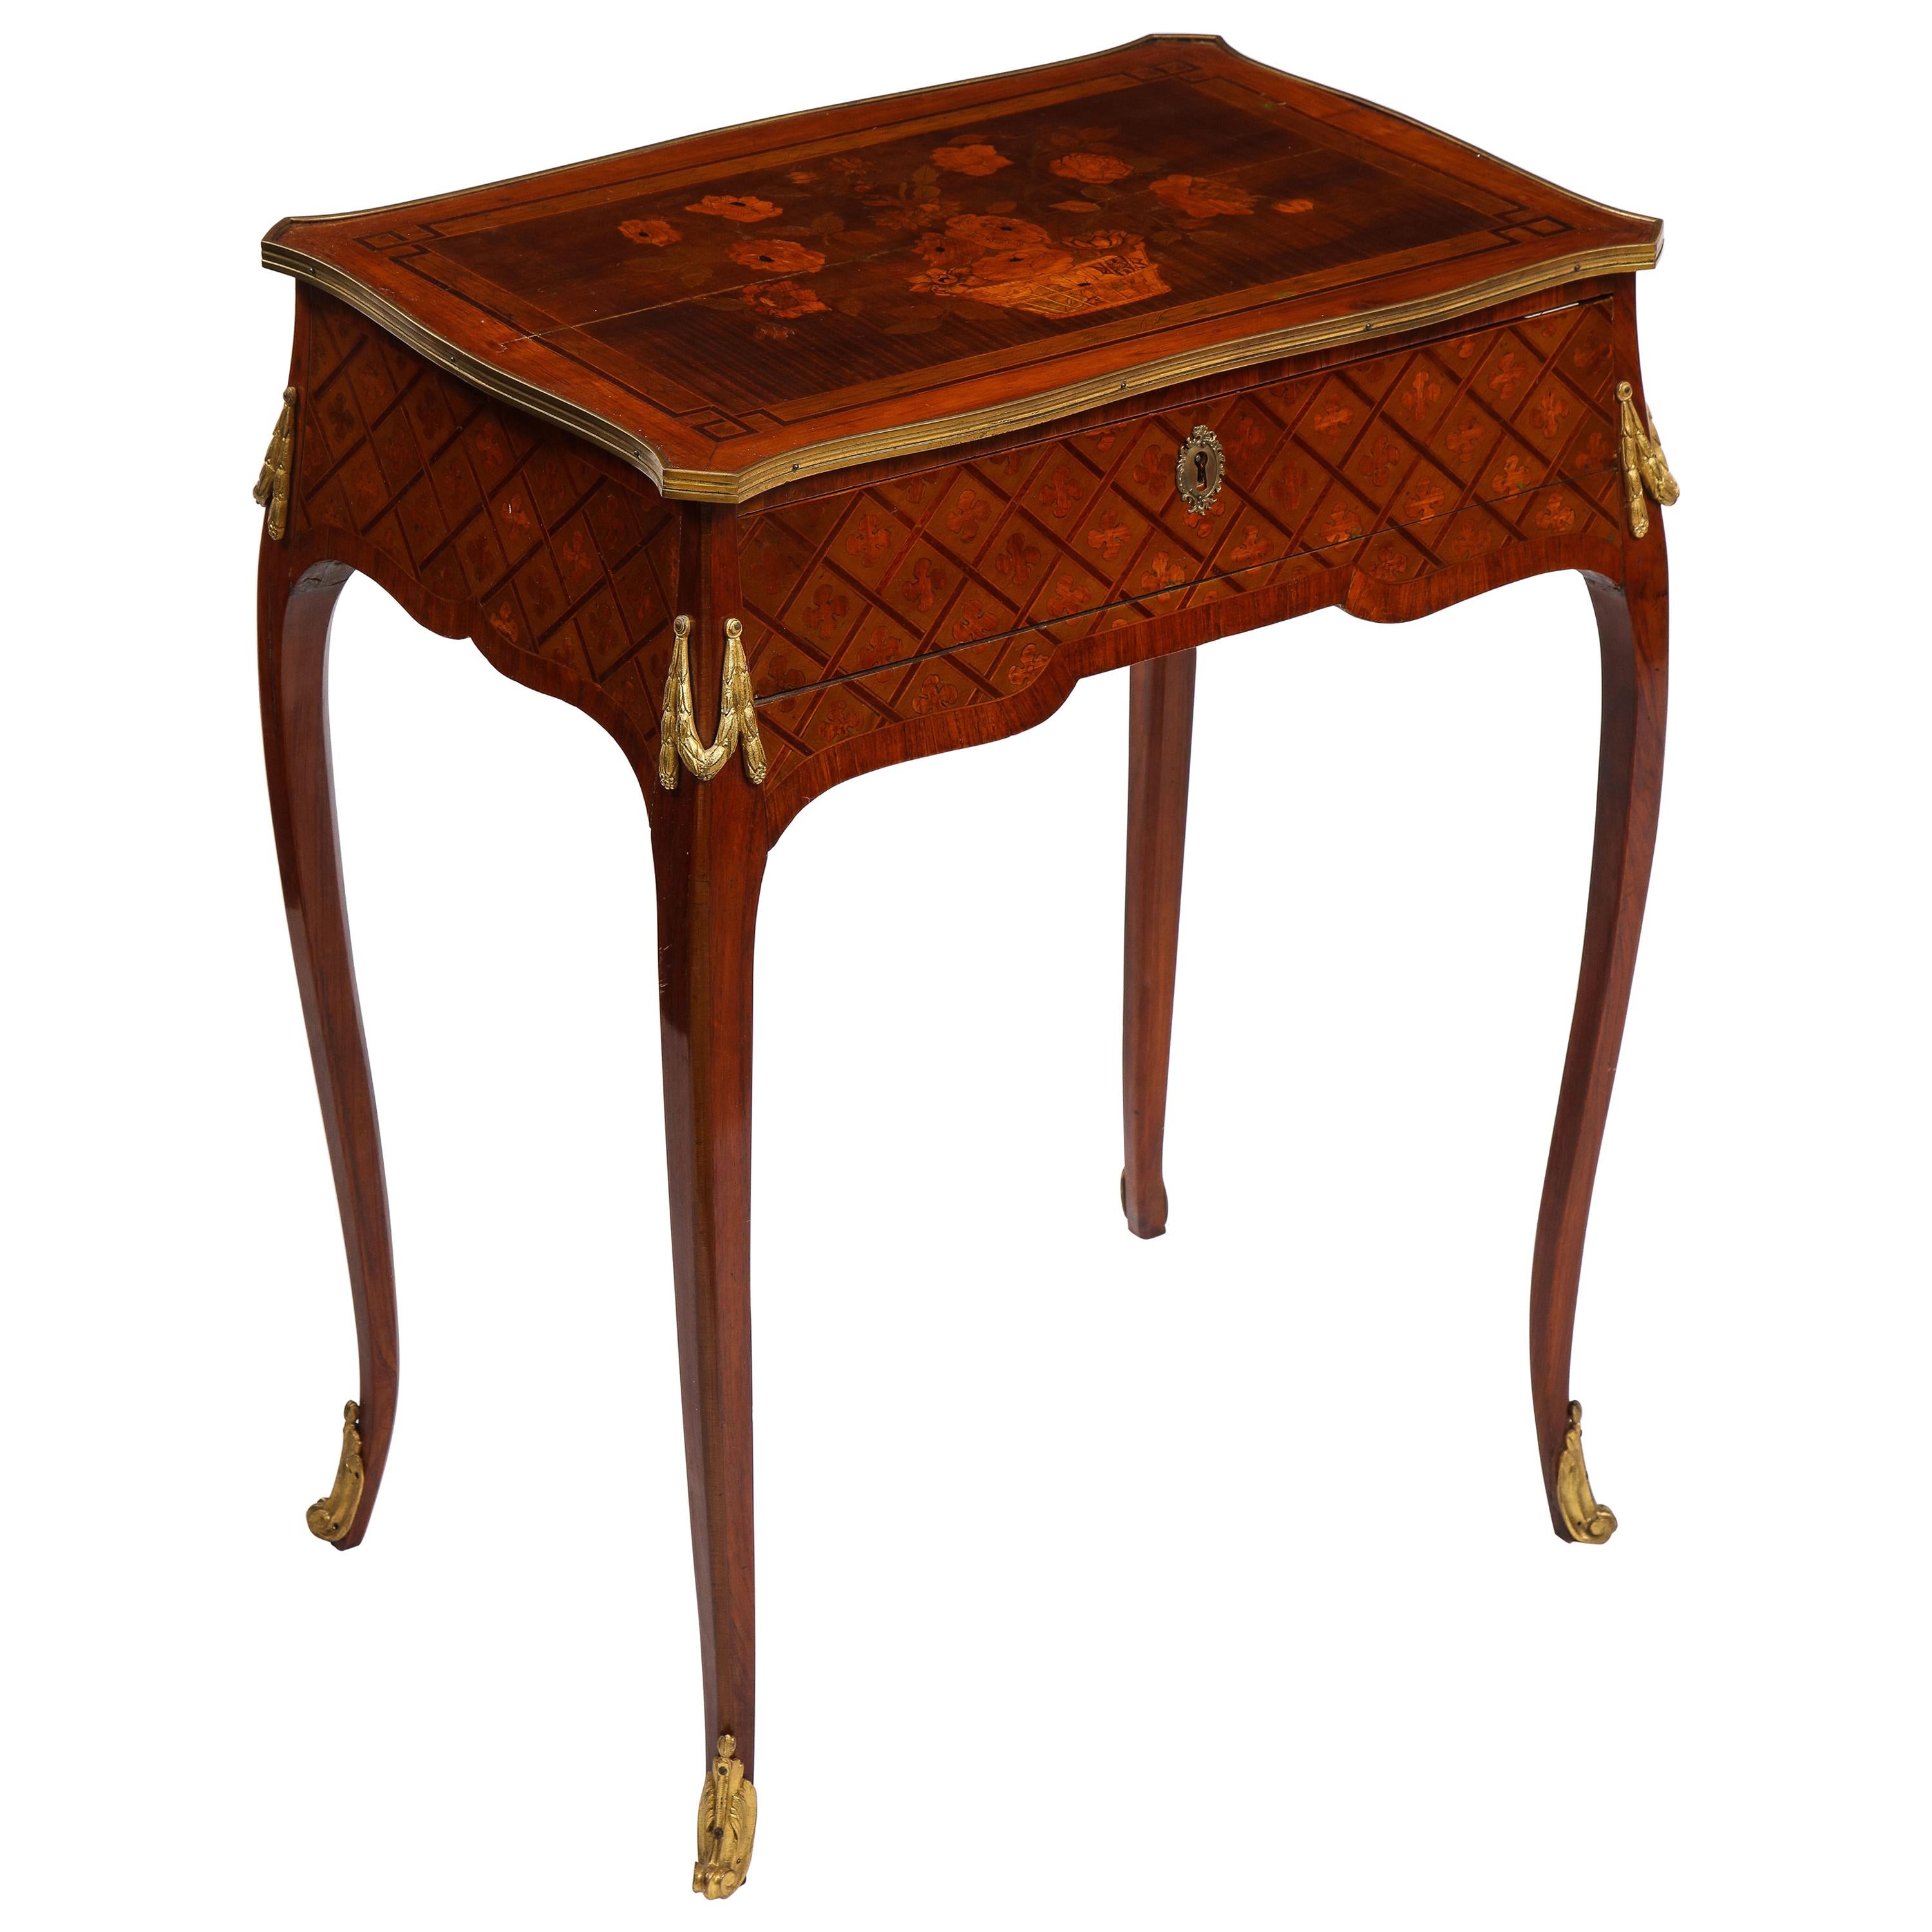 French Louis XVI Period Dore Bronze Mounted Marquetry and Parquetry Side Table